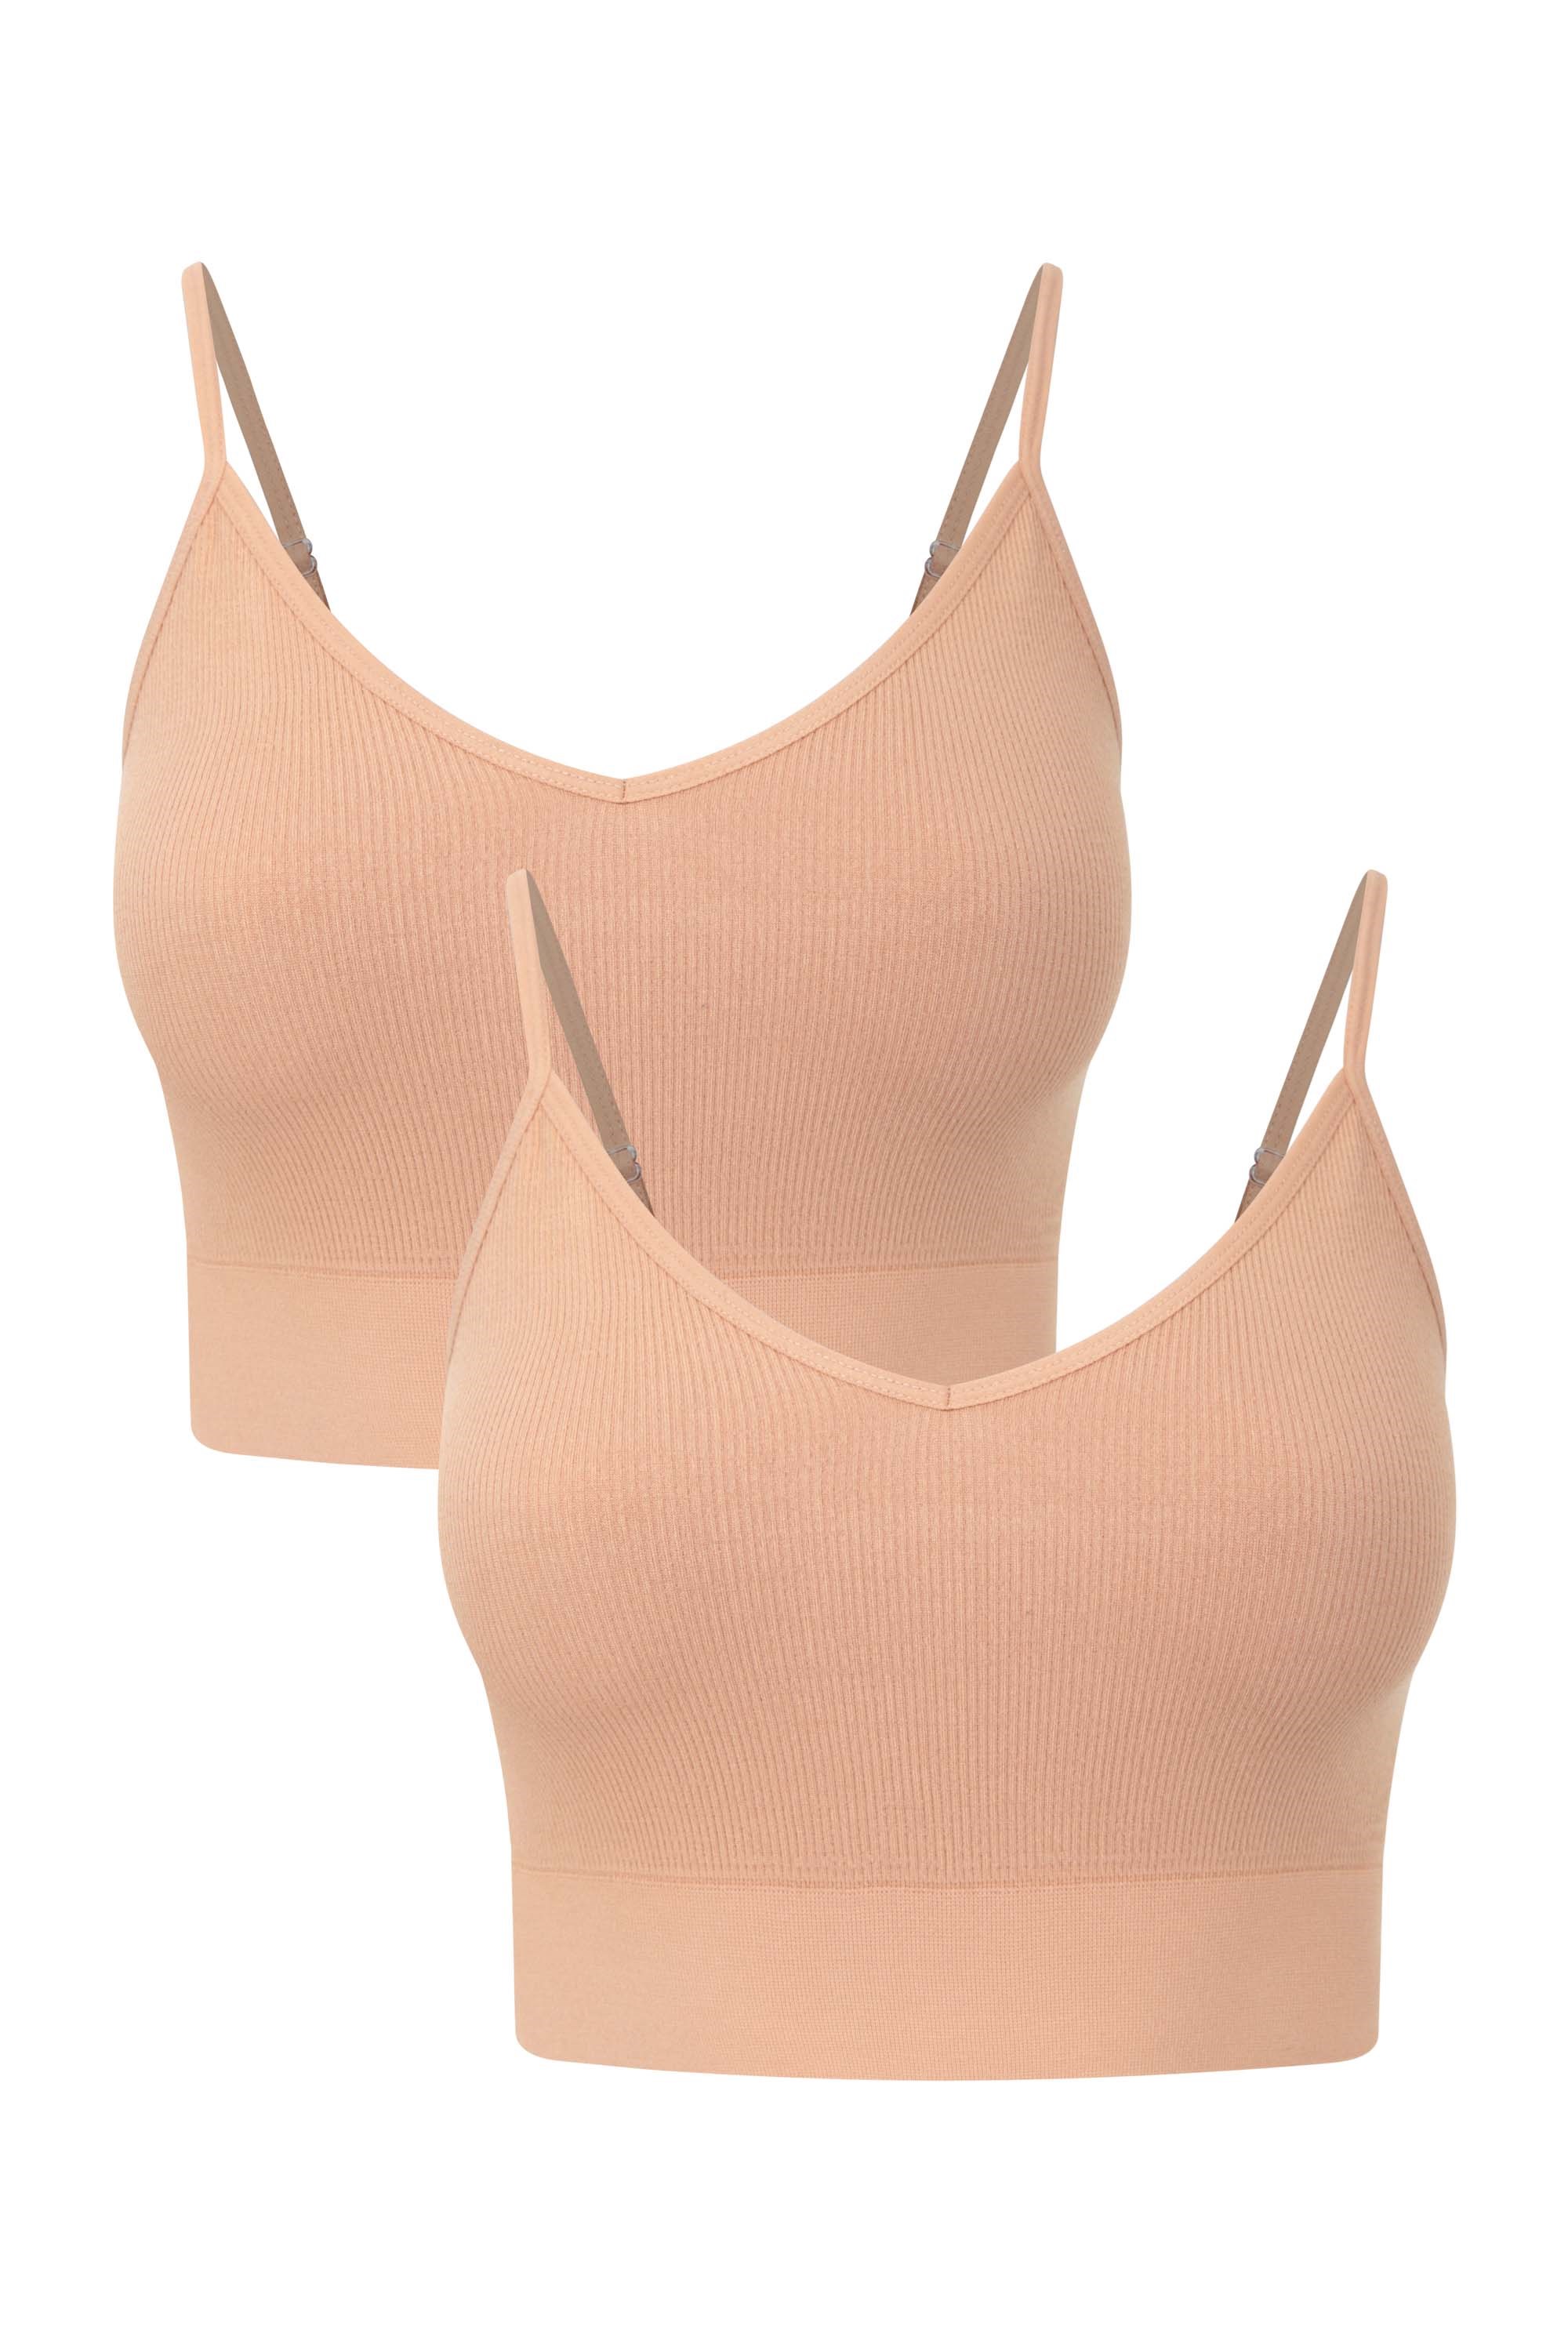 50% off Clear!Sports Bras for Women Casual and Comfortable Bras